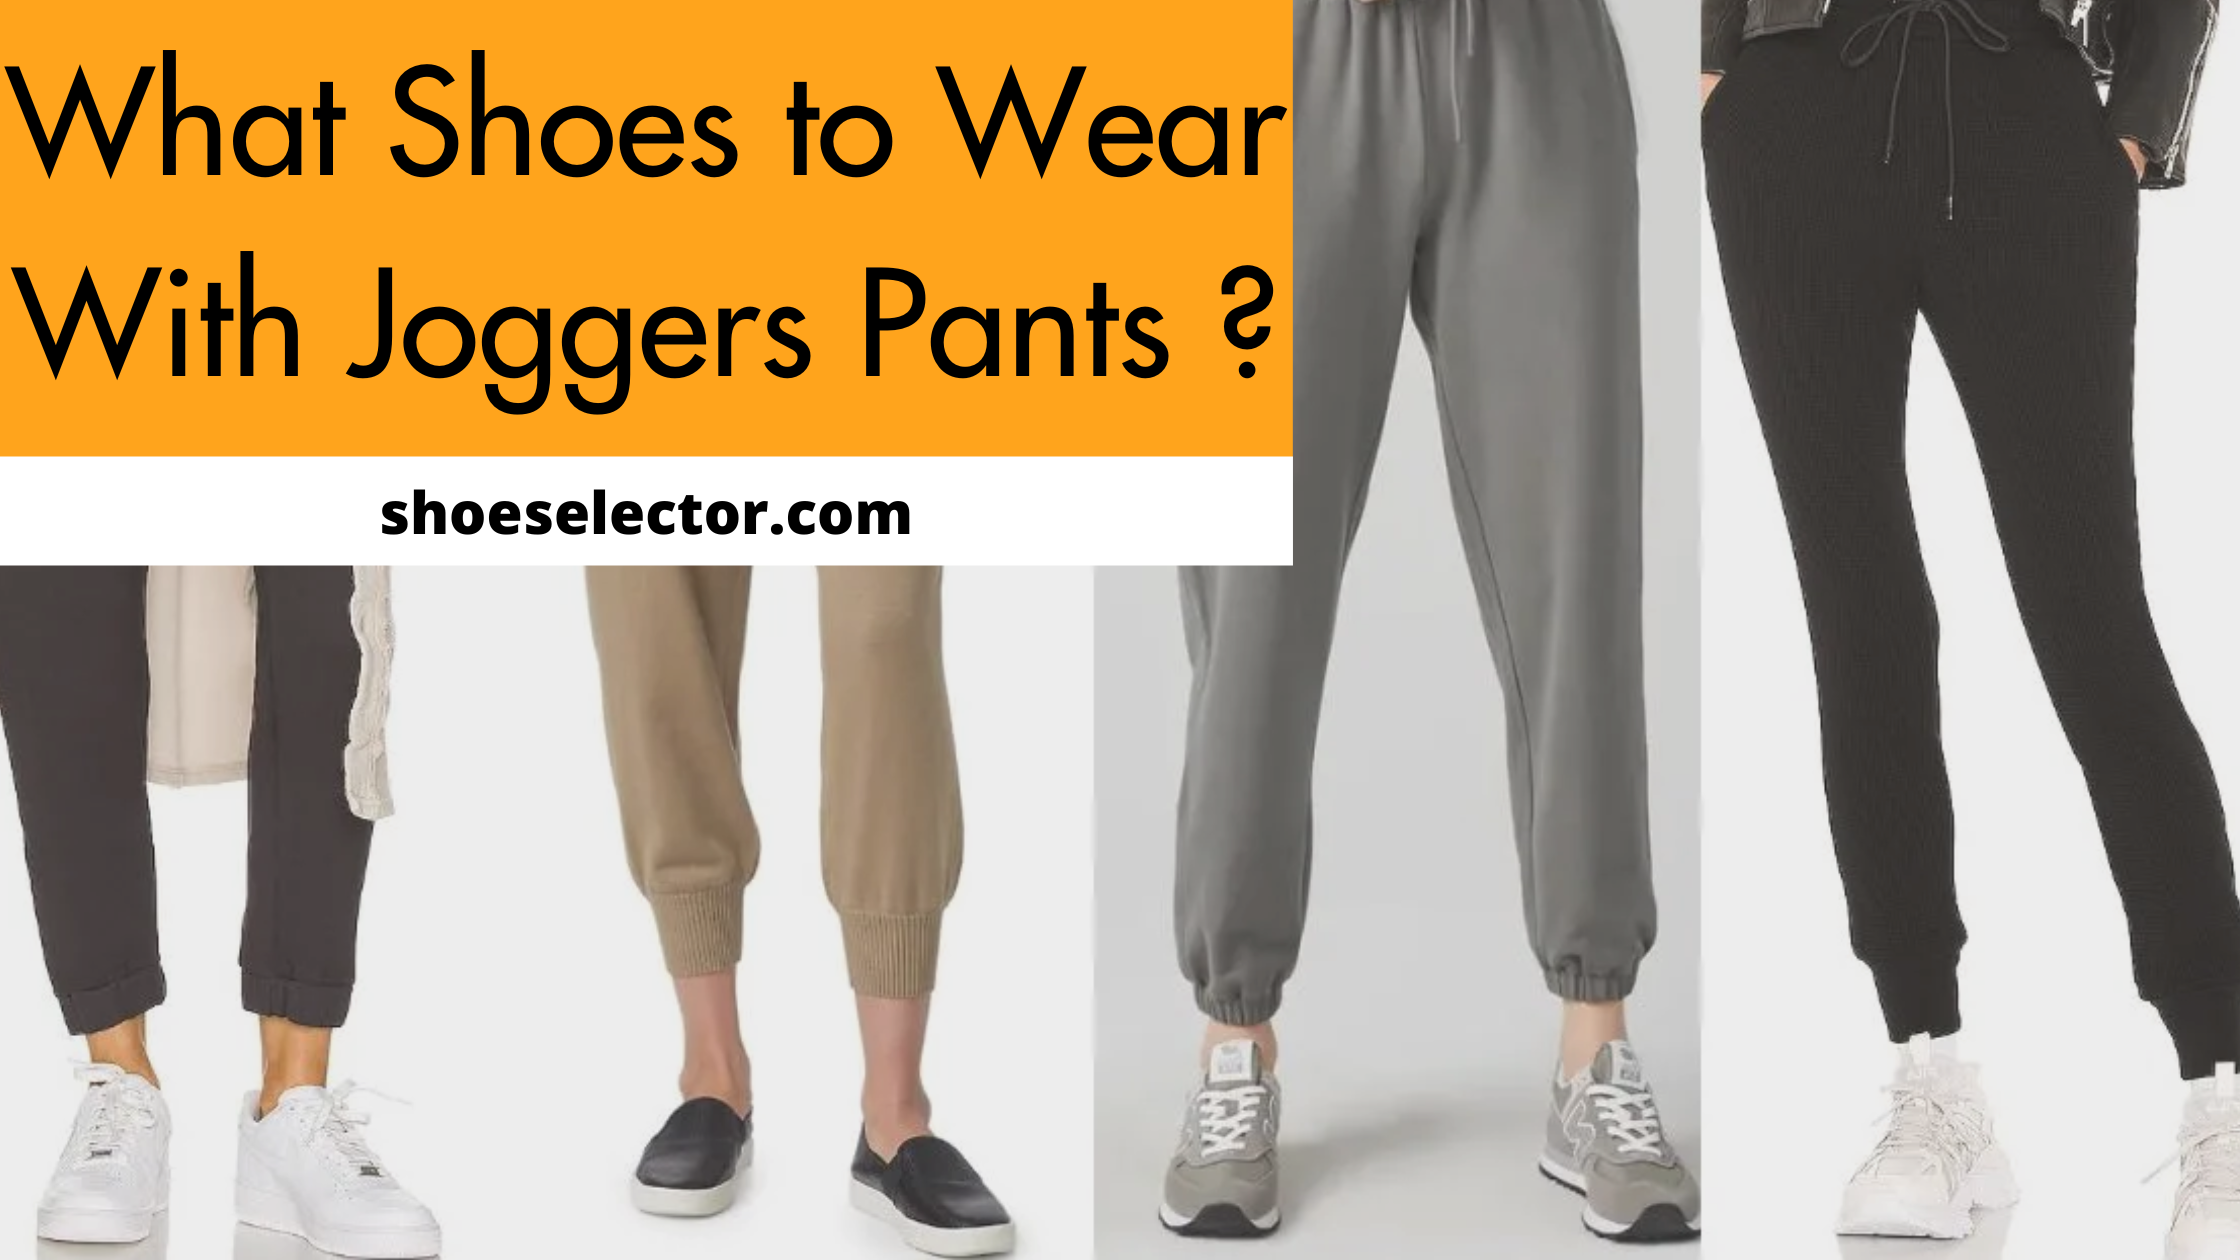 What Shoes To Wear With Joggers Pants? - Solution Guide